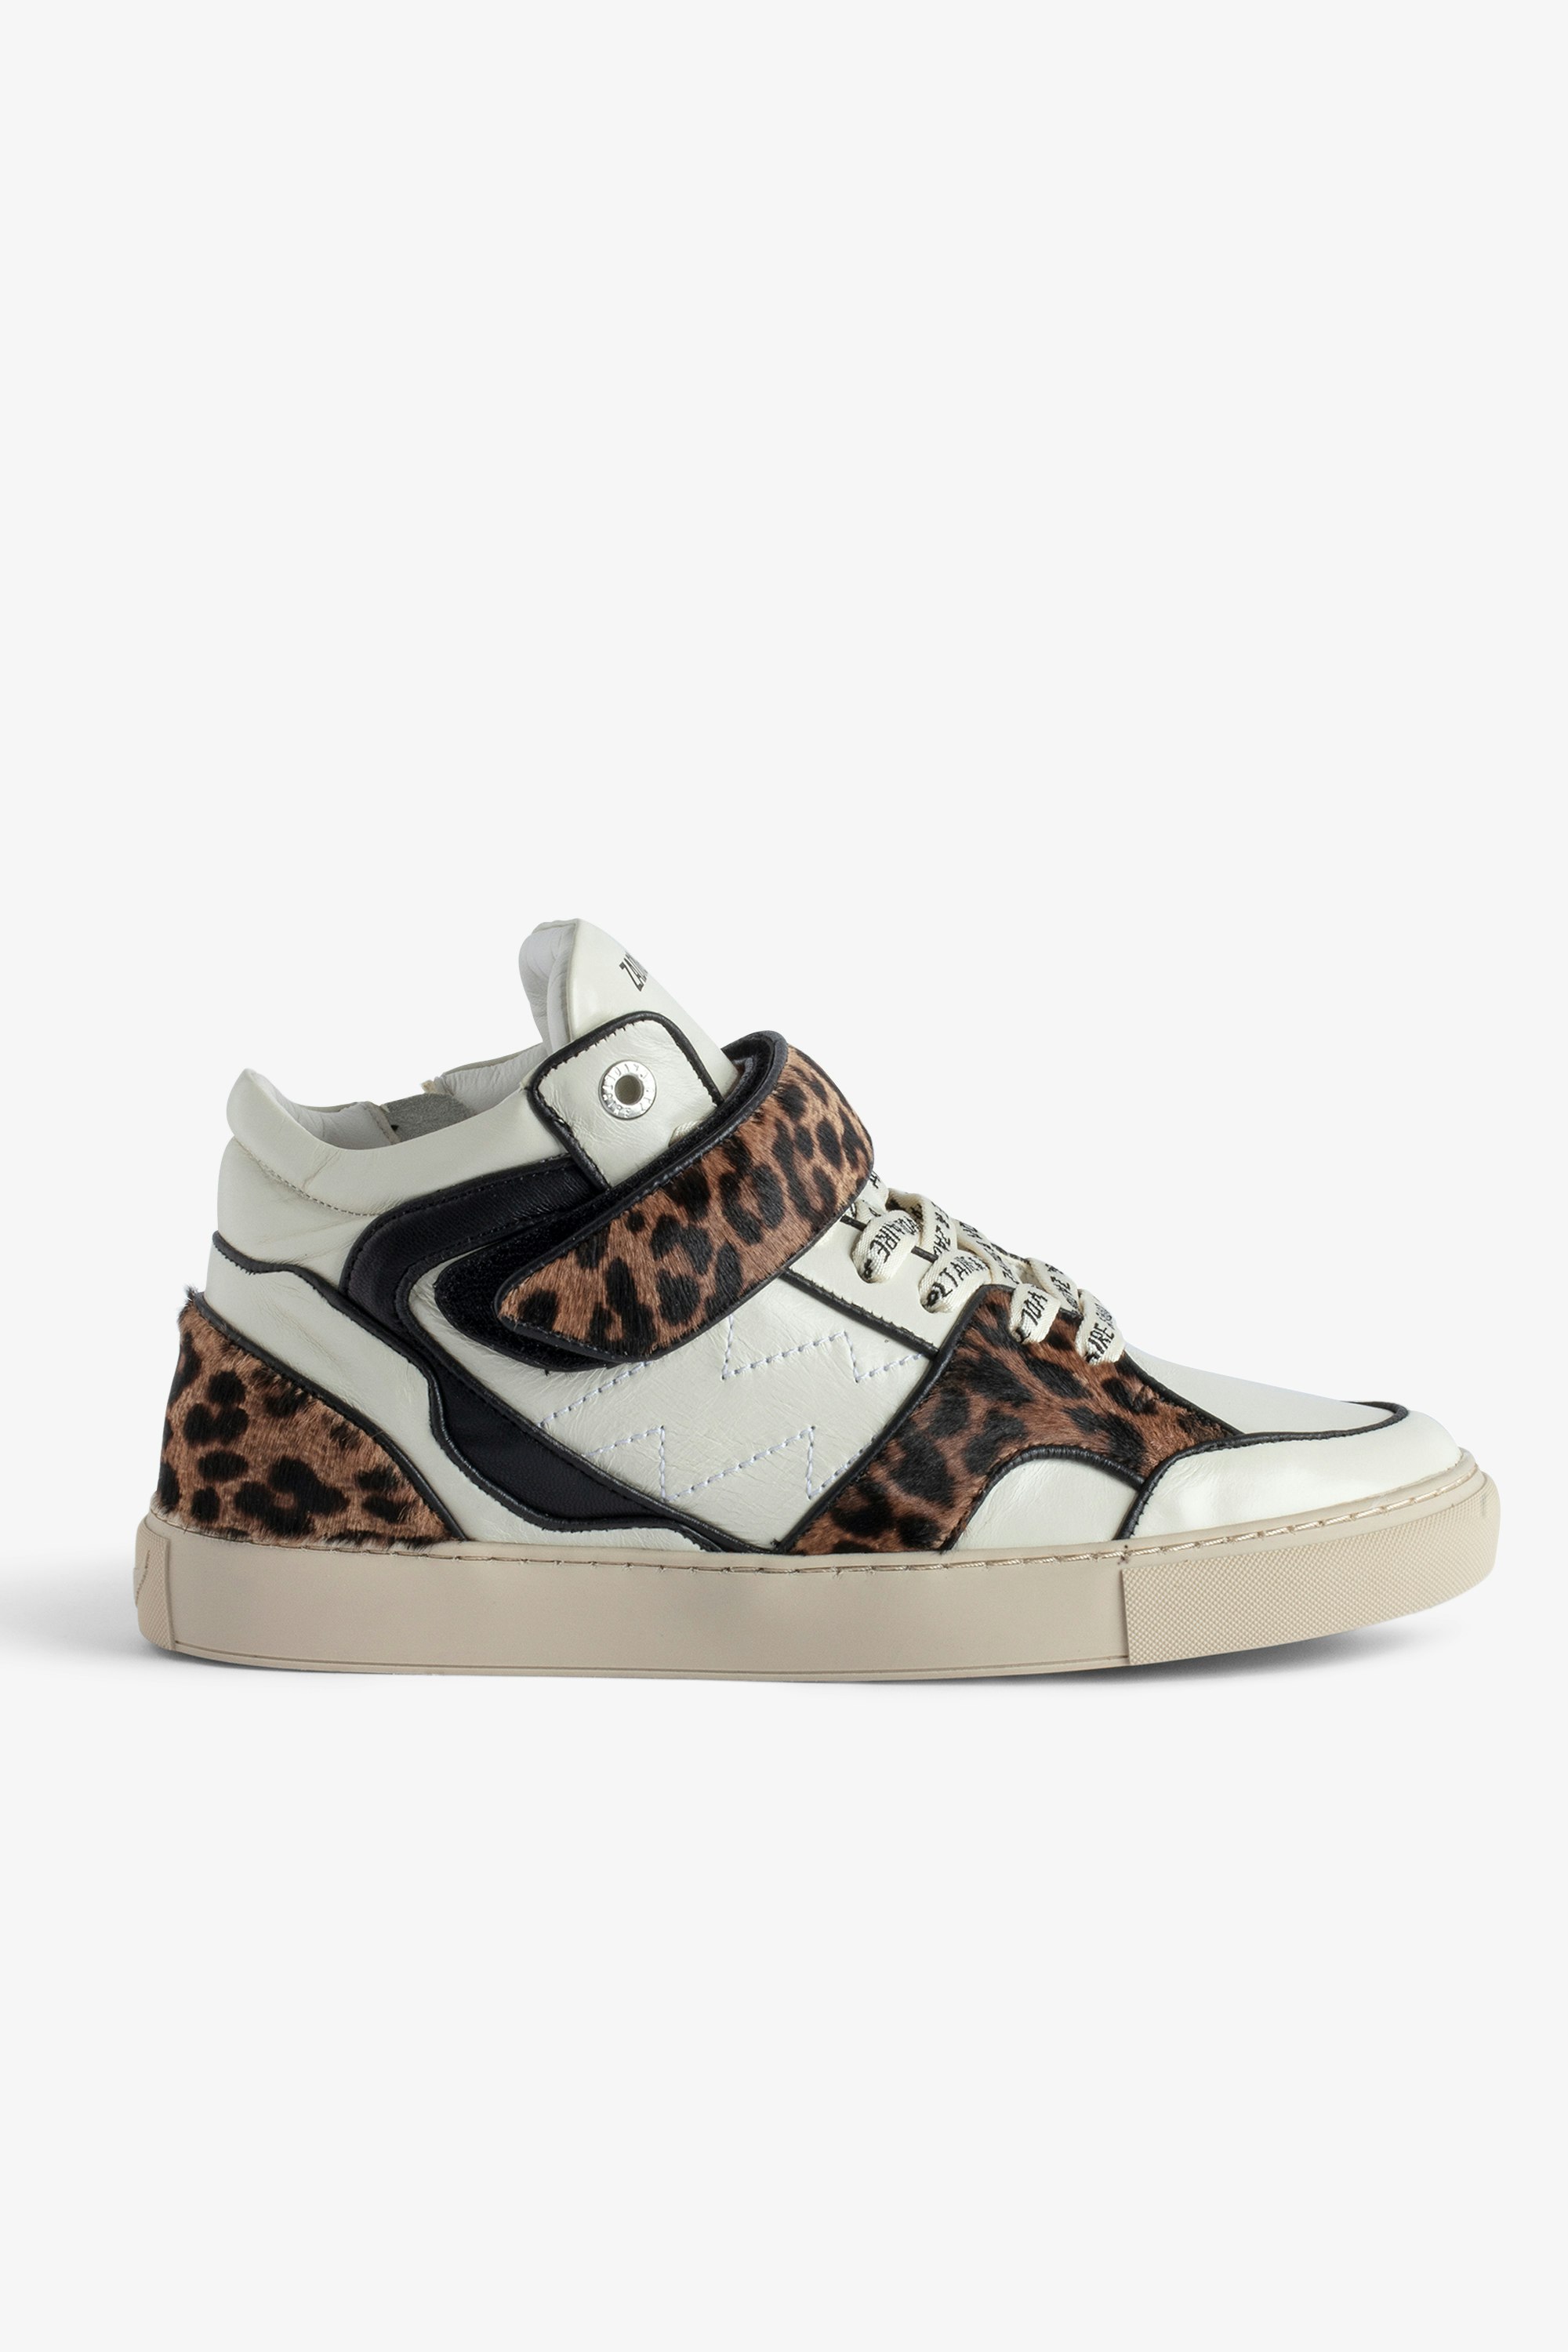 ZV1747 Mid Flash trainers - Women’s leopard-effect brown leather mid-top trainers with contrasting panels and Velcro fastening.